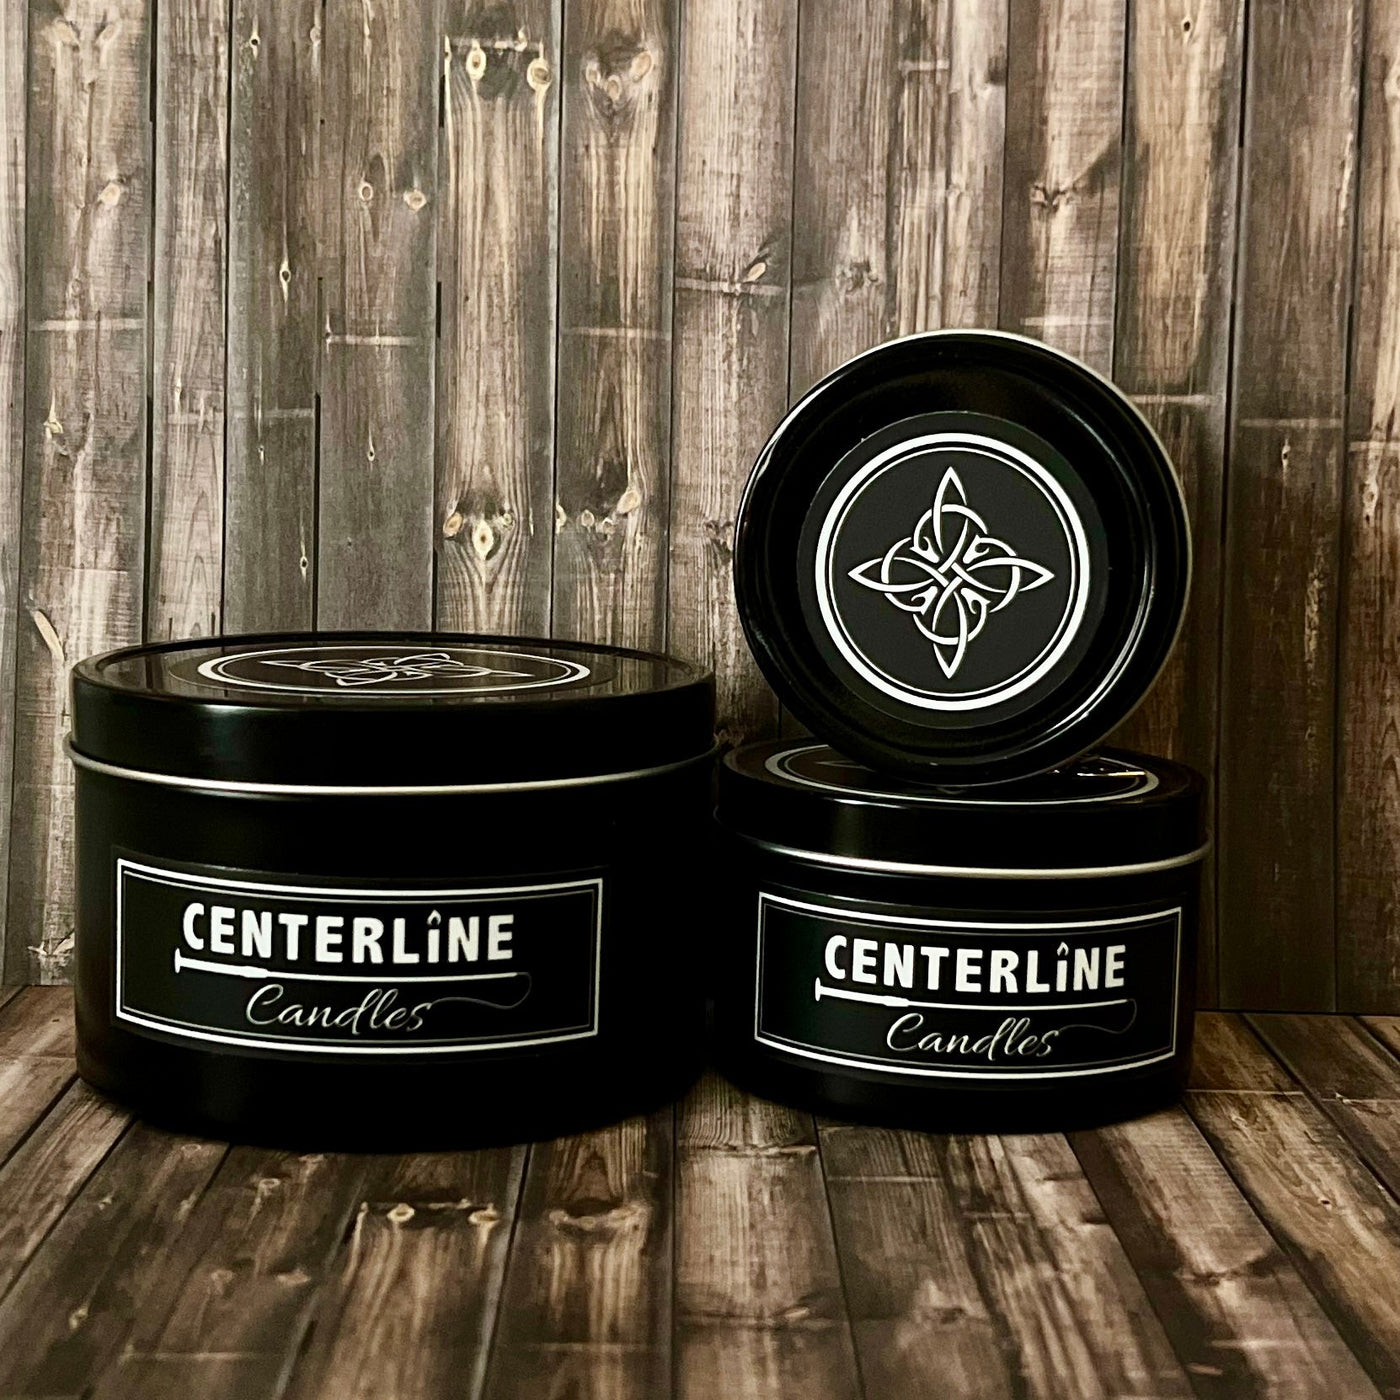 Creamsicle by Centerline Candles